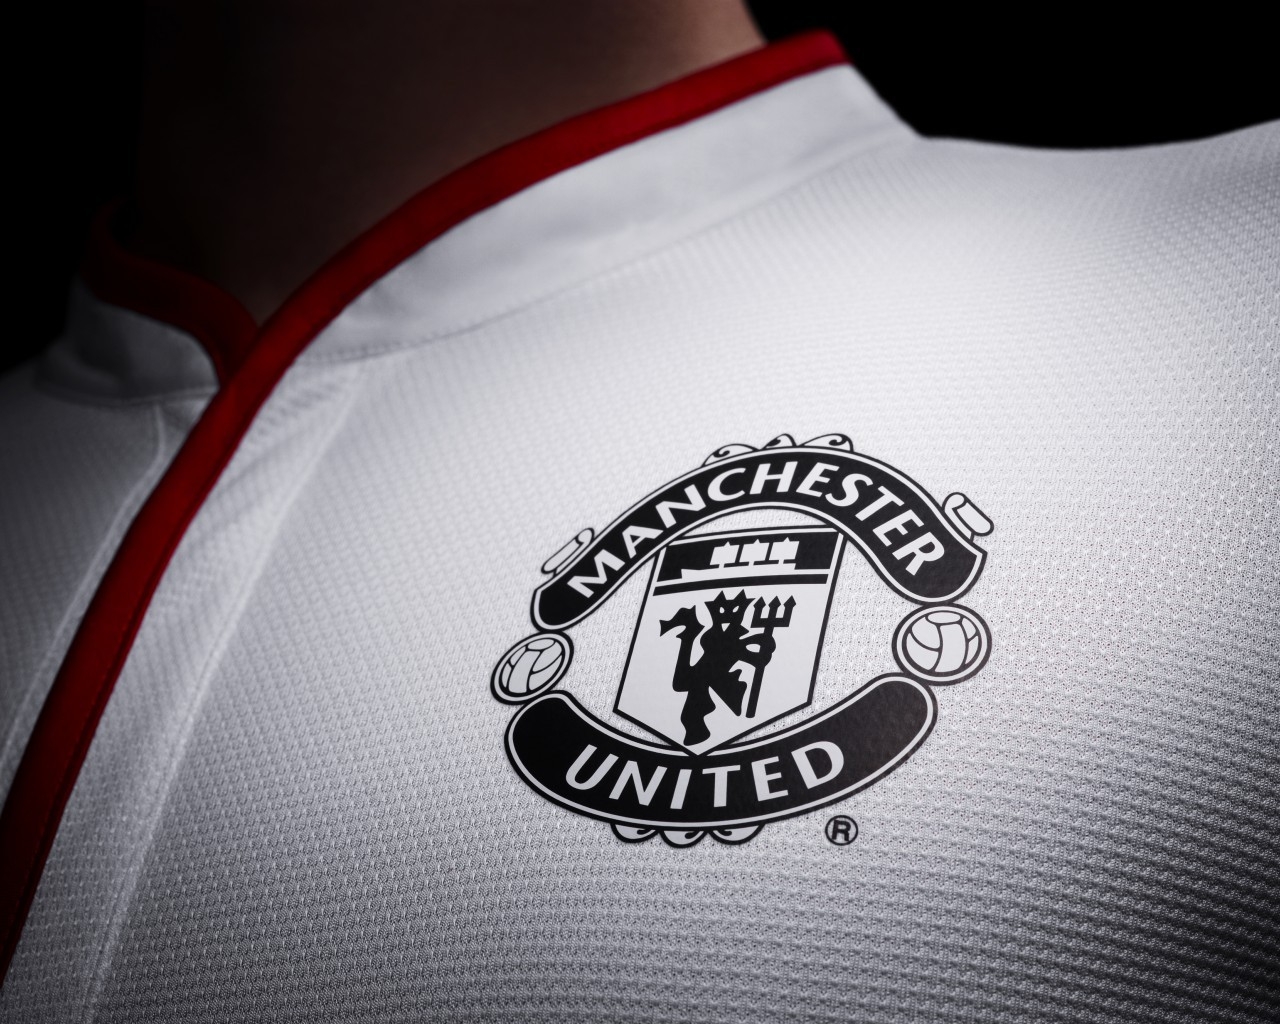 Manchester United Tshirts for 1280 x 1024 resolution